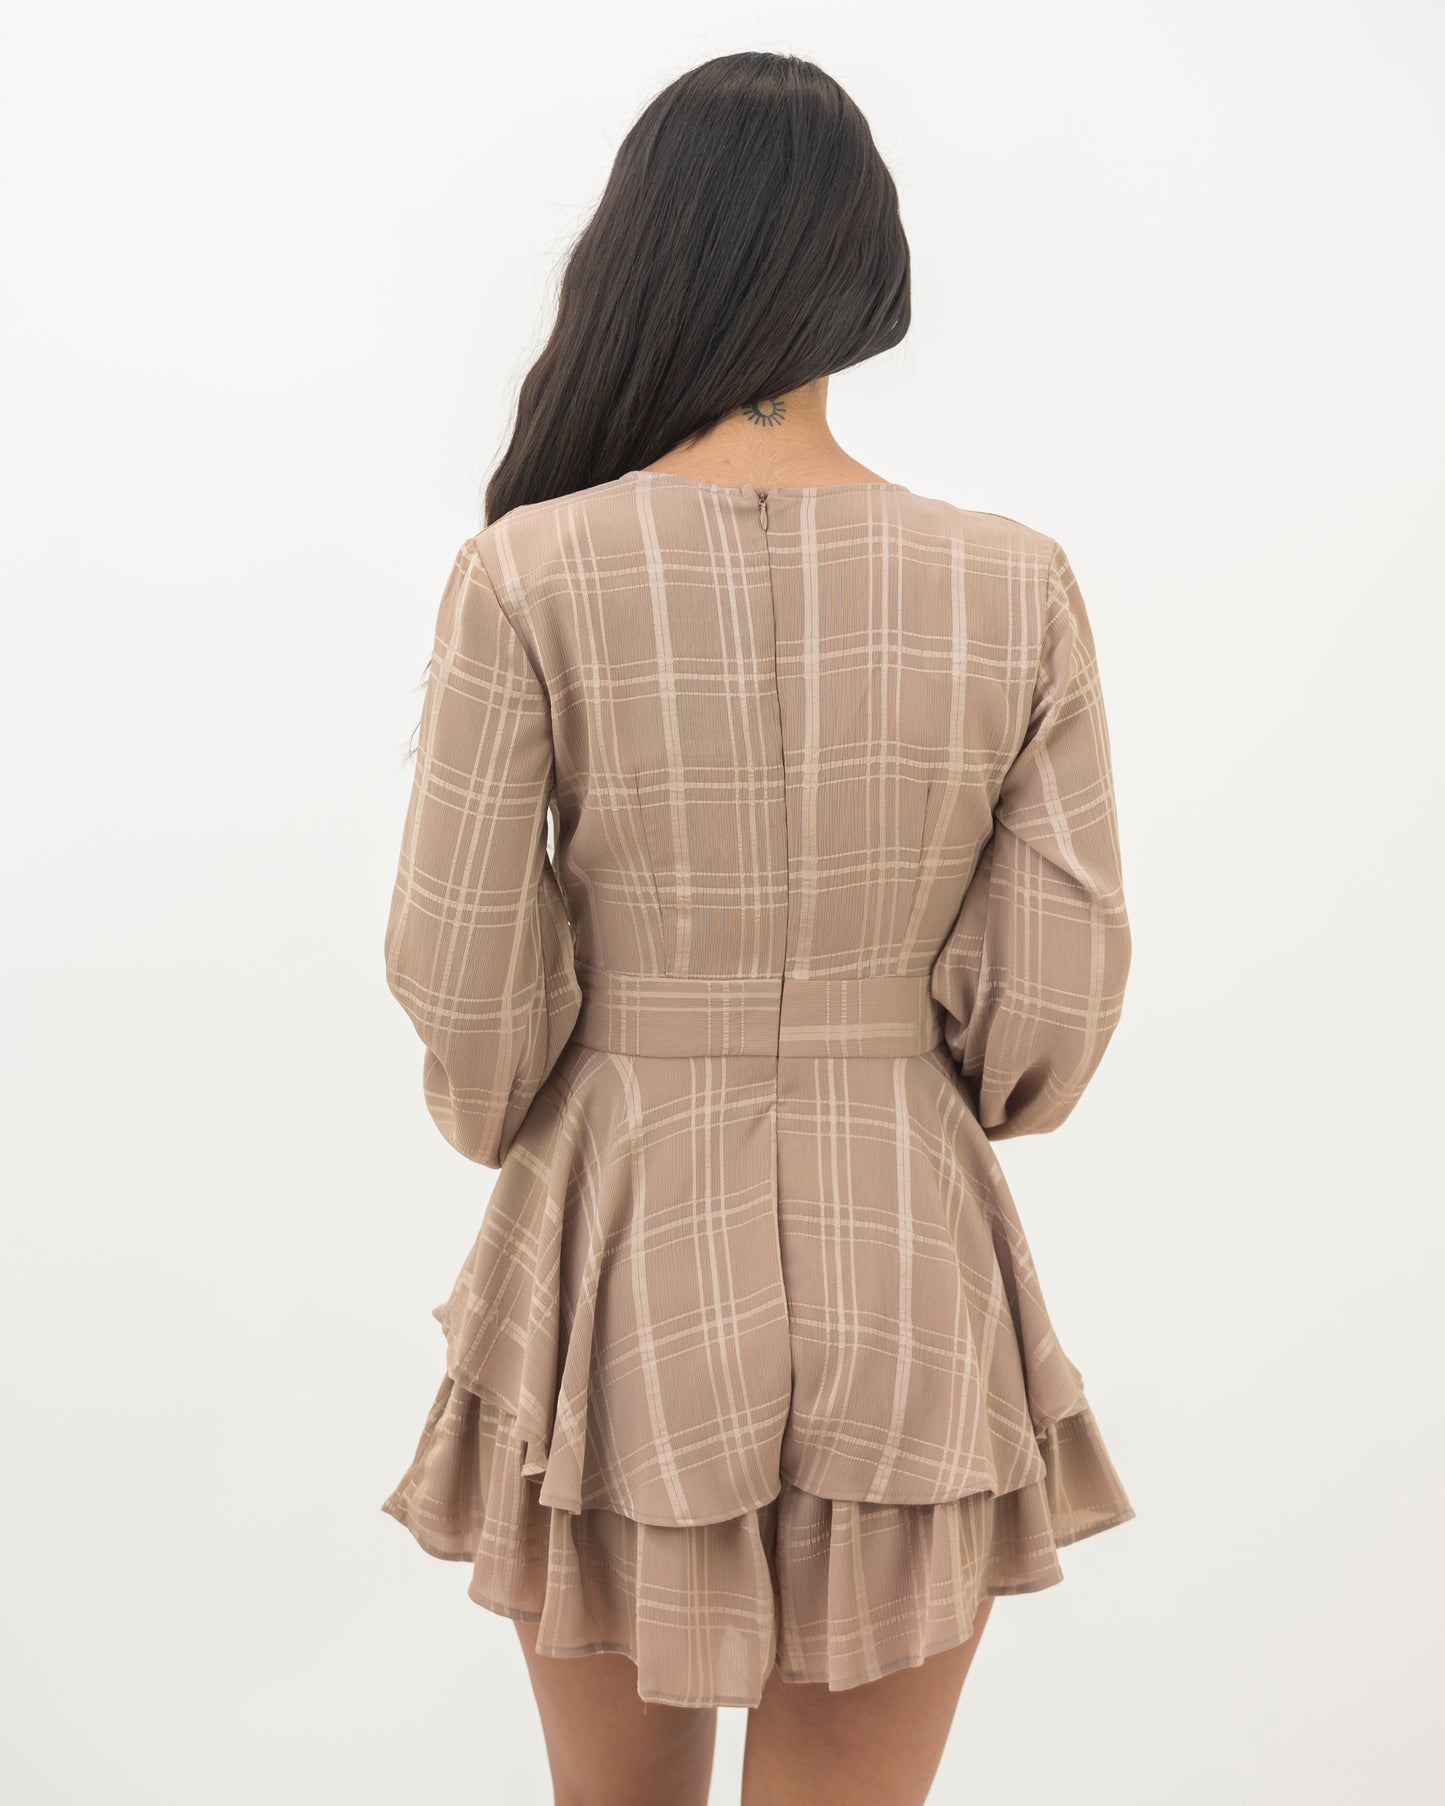 Fashion Light Brown Checkered Ruffle Tie-Up Romper with Bell Sleeve